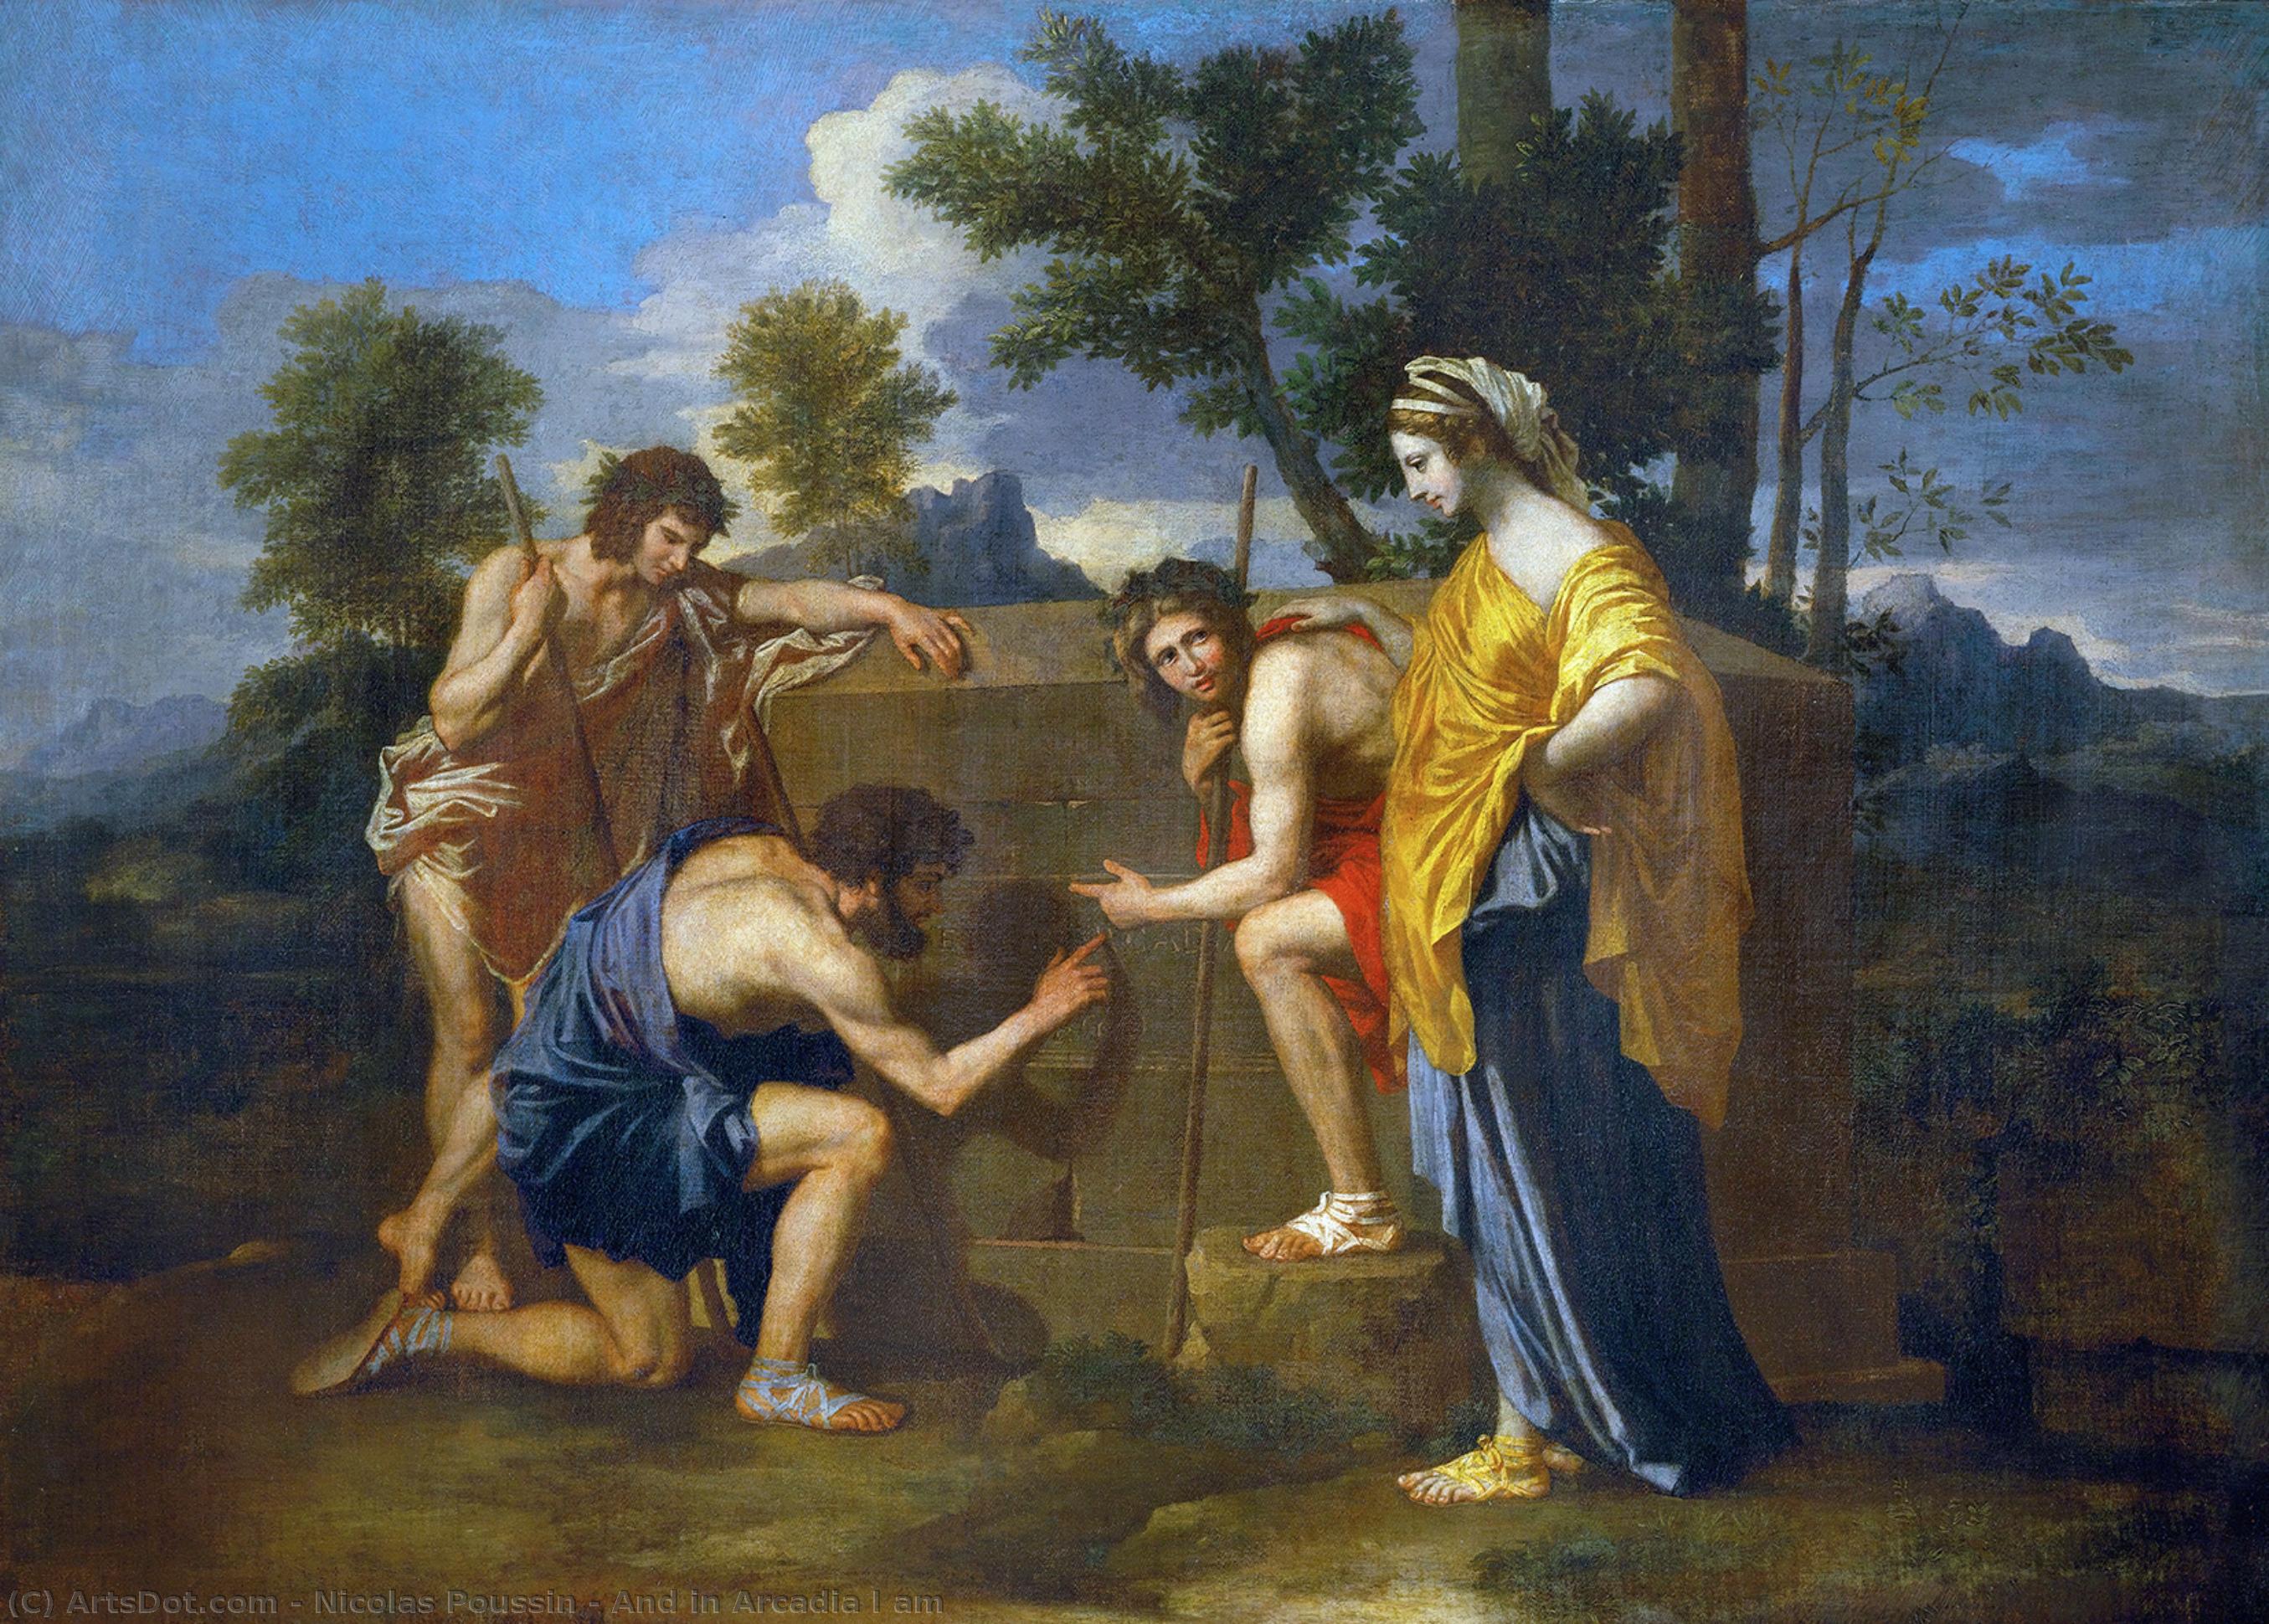 Order Art Reproductions And in Arcadia I am, 1640 by Nicolas Poussin (1594-1665, France) | ArtsDot.com